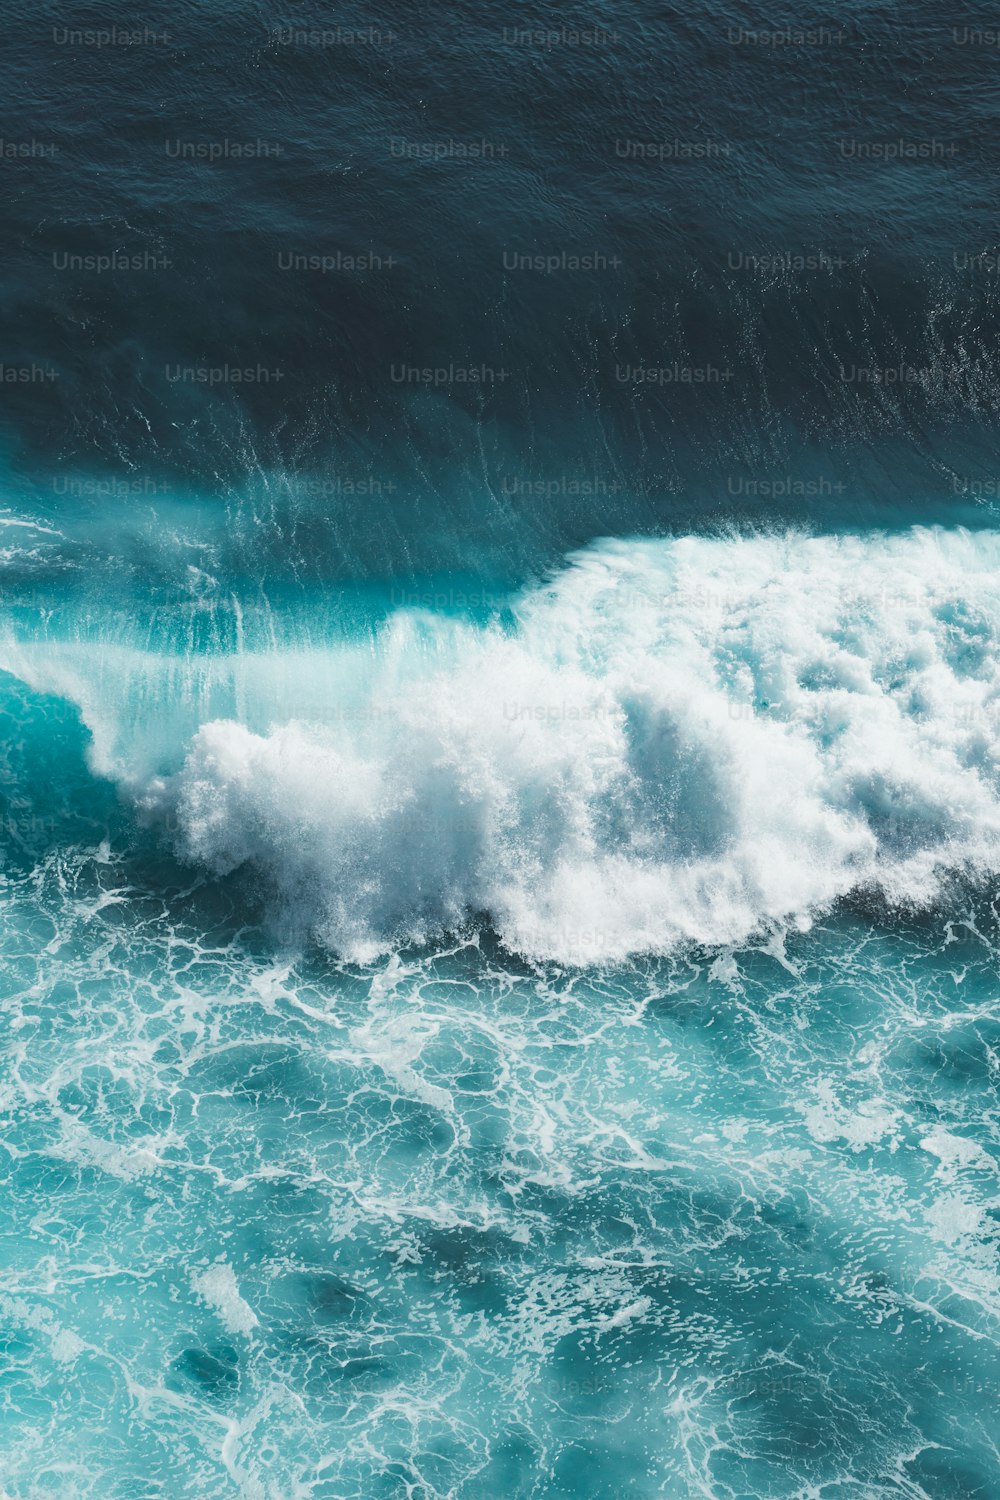 Water Wave Pictures  Download Free Images on Unsplash